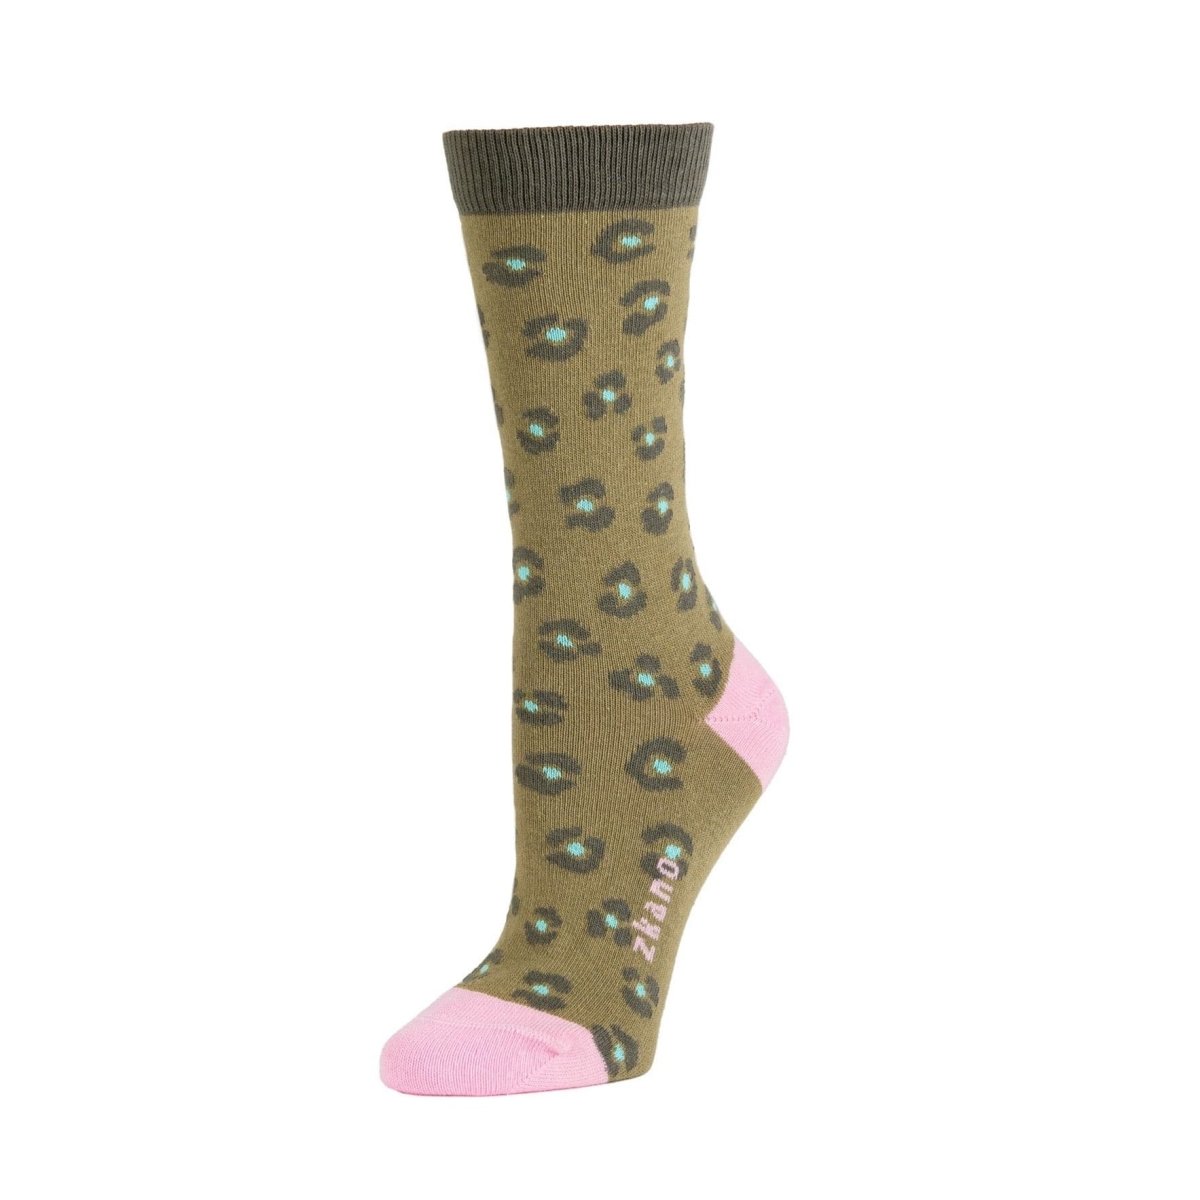 A dark green crew sock with green and bright blue cheetah pattern. Toe and heel are light pink, including the logo along the arch. The Cheetah Print crew in Olivine is from Zkano and made in Alabama, USA.